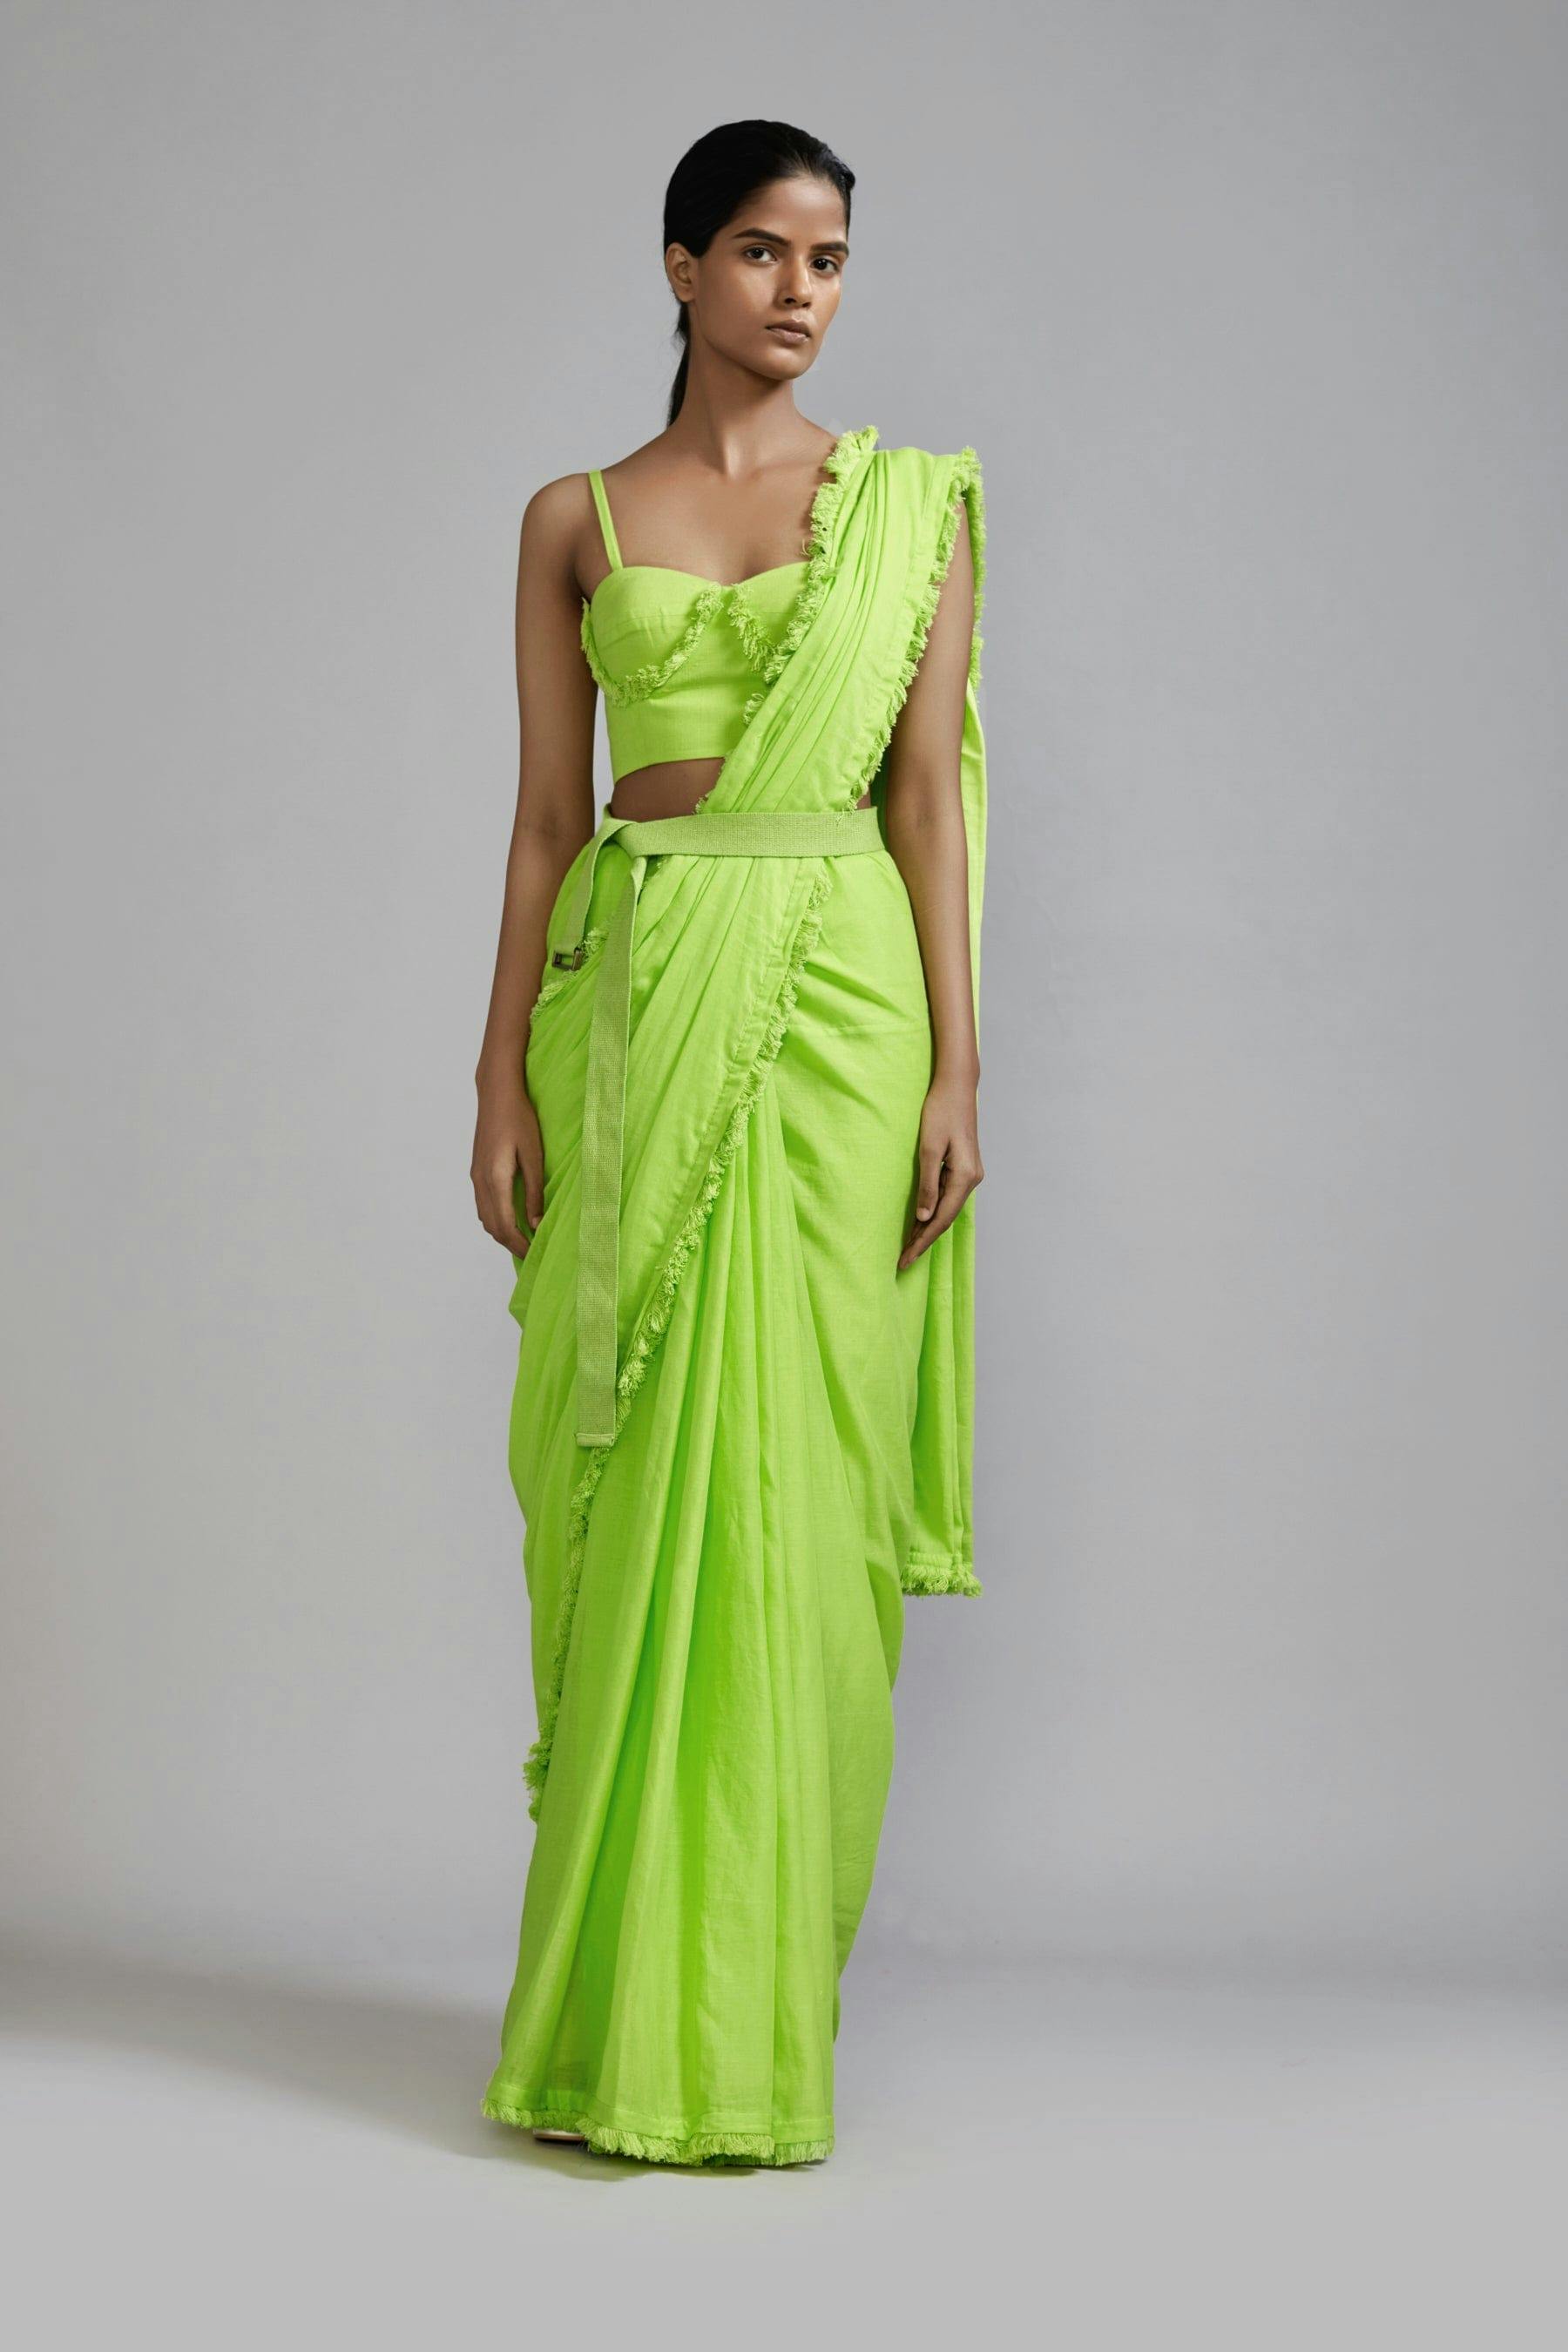 Thumbnail preview #1 for Neon Green Fringed Saree